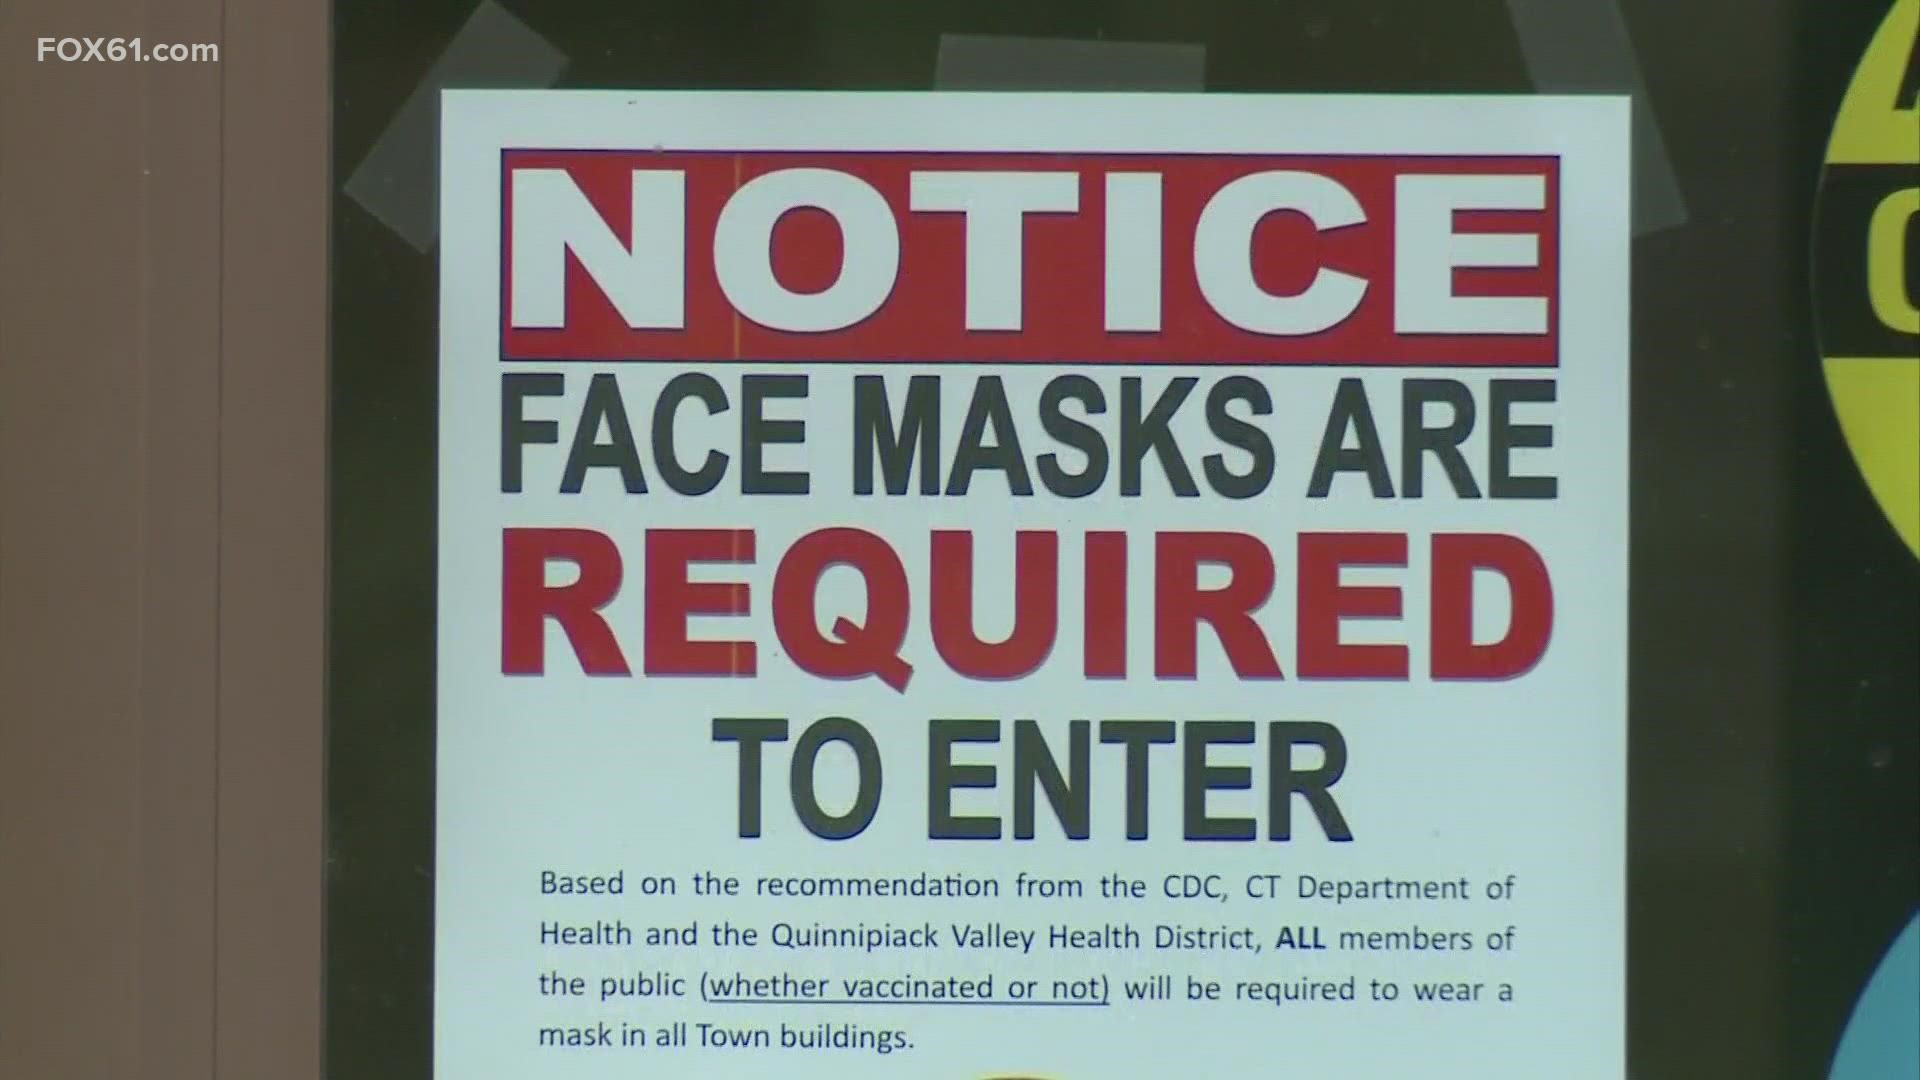 People will have to wear masks inside any New Haven building like bars, restaurants, theaters, and office buildings, regardless of vaccination status.